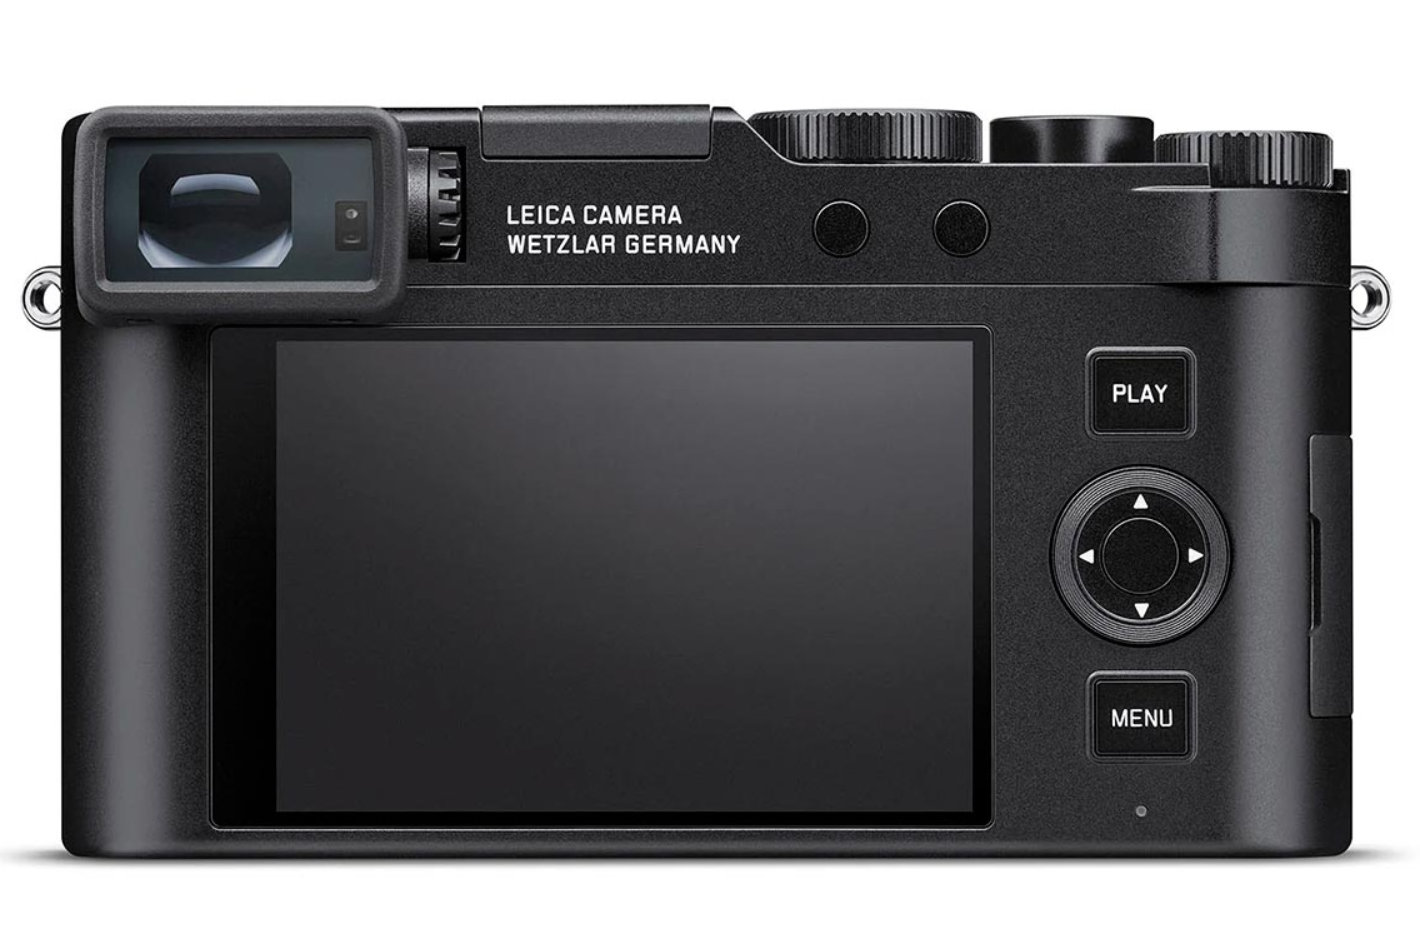 Leica D-Lux 8: a revamped D-Lux 7 with a touch of Q